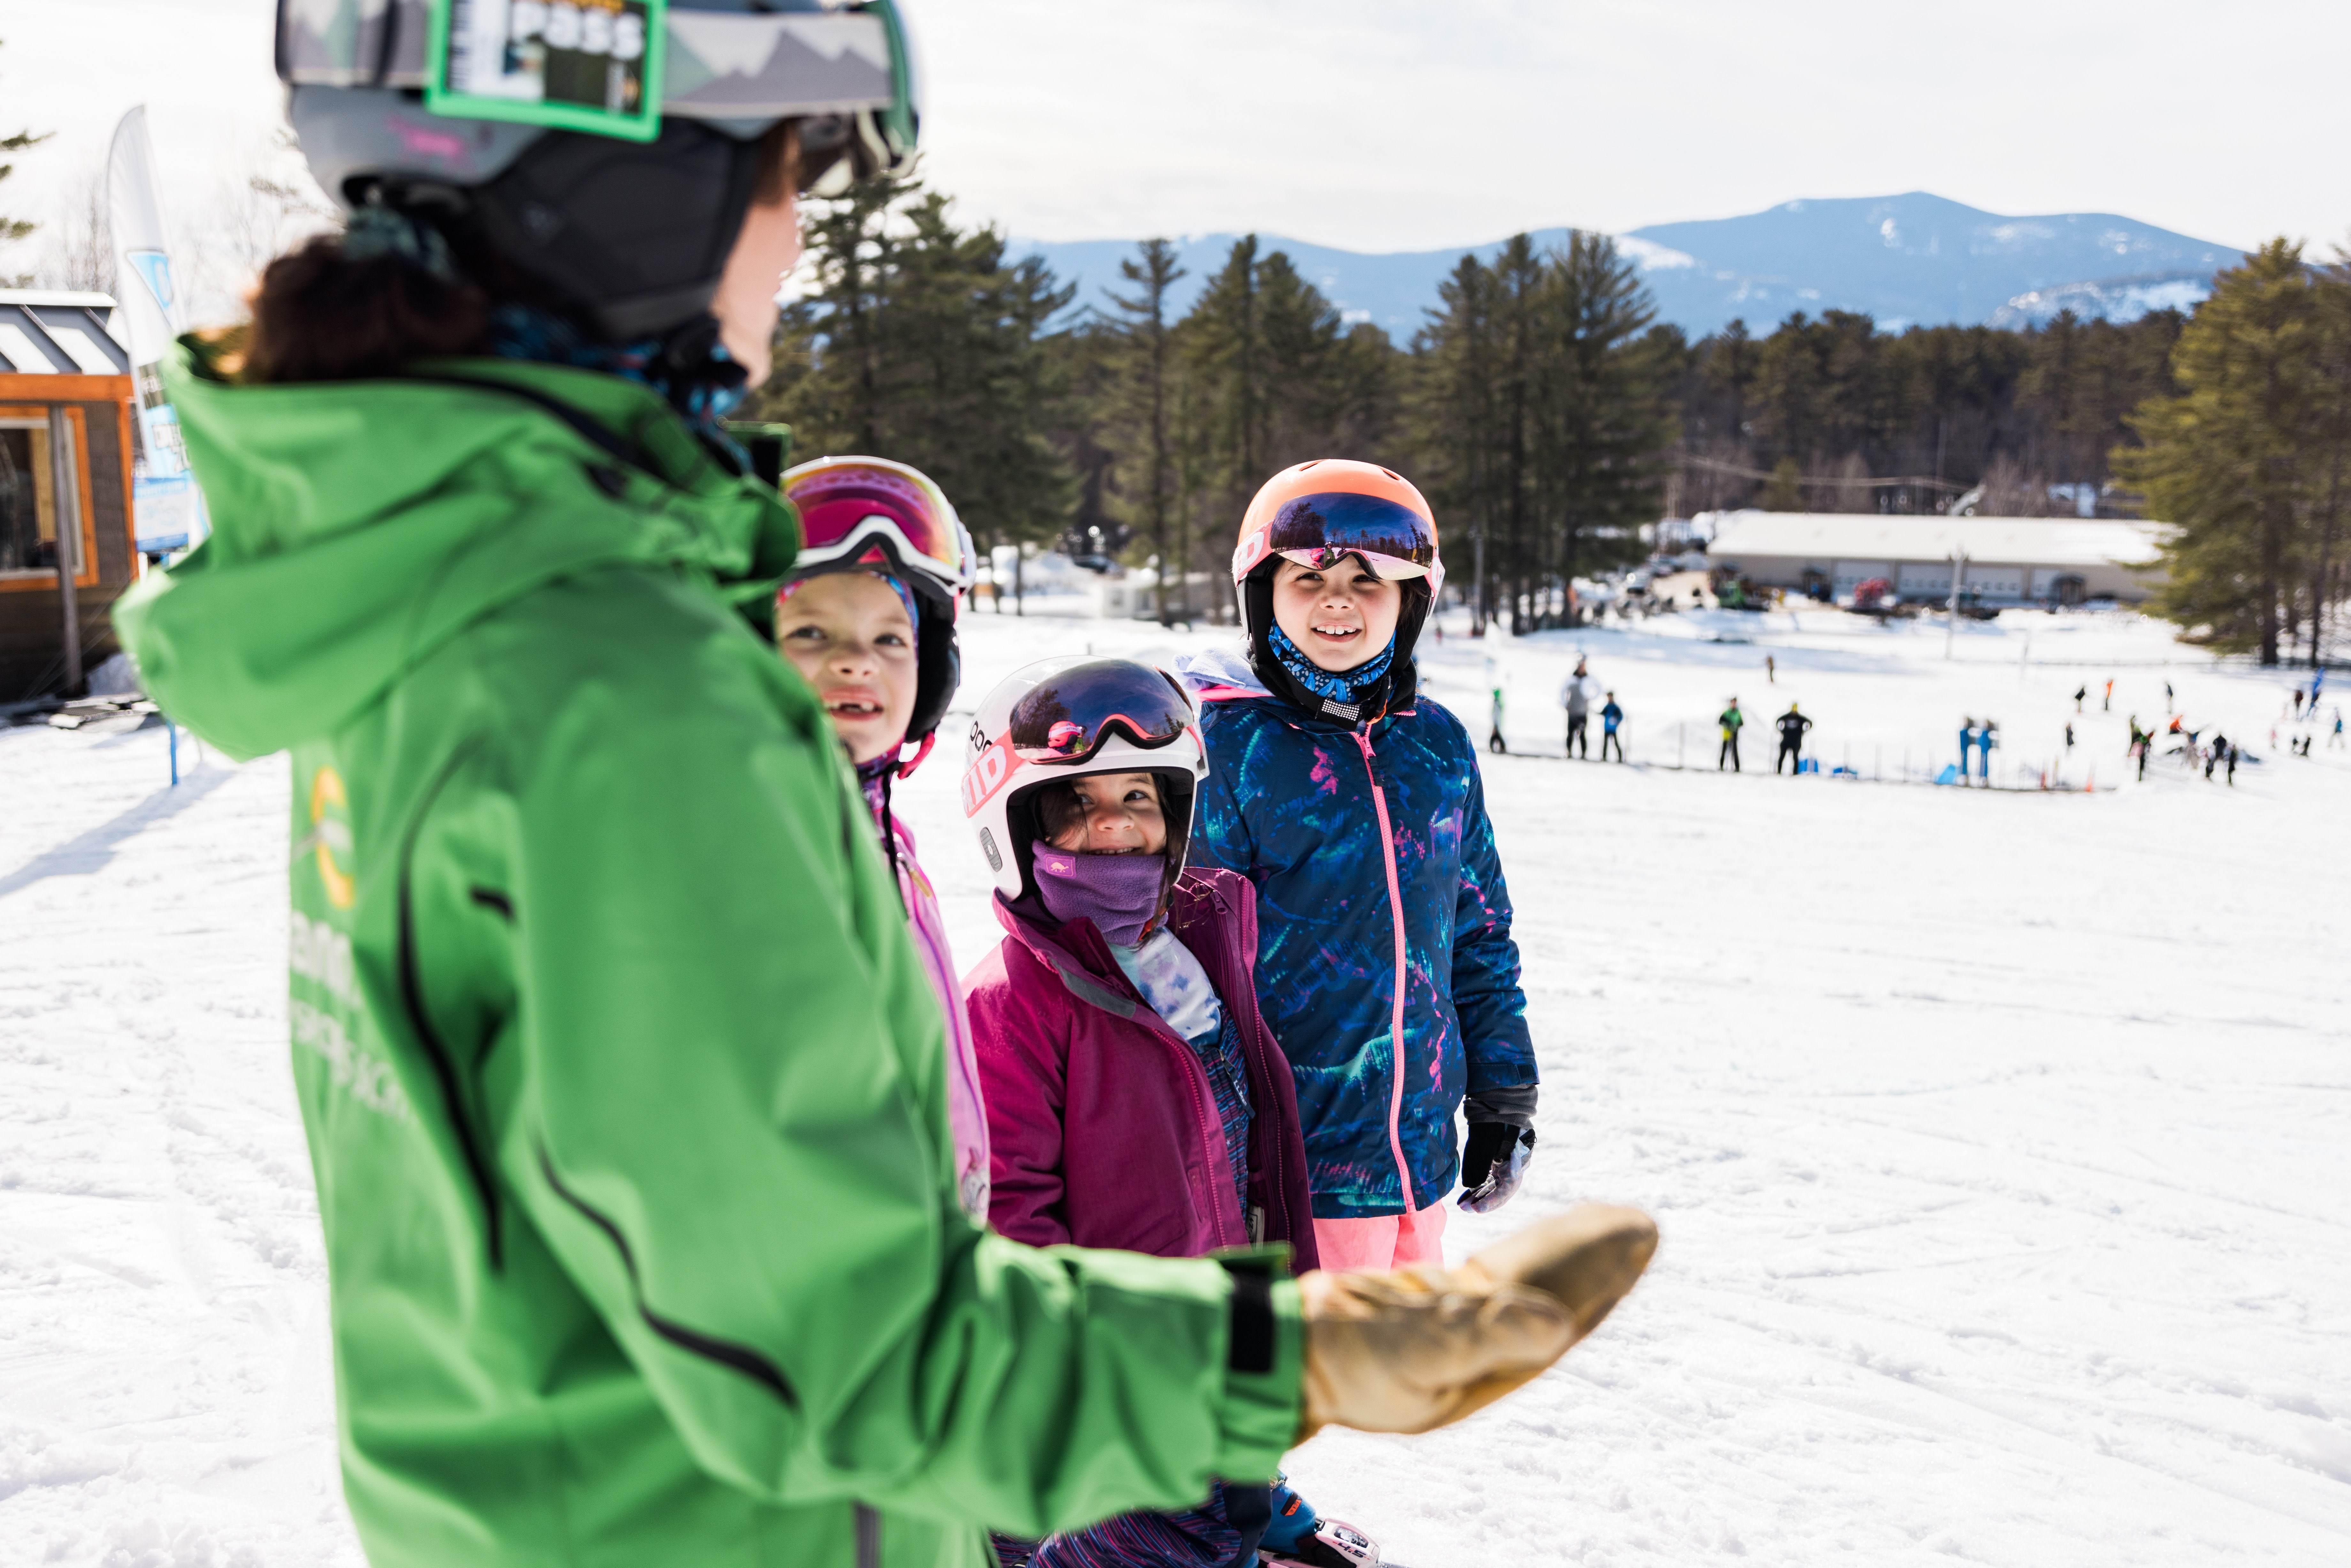 Instructor in green jacket with three girls learning to ski